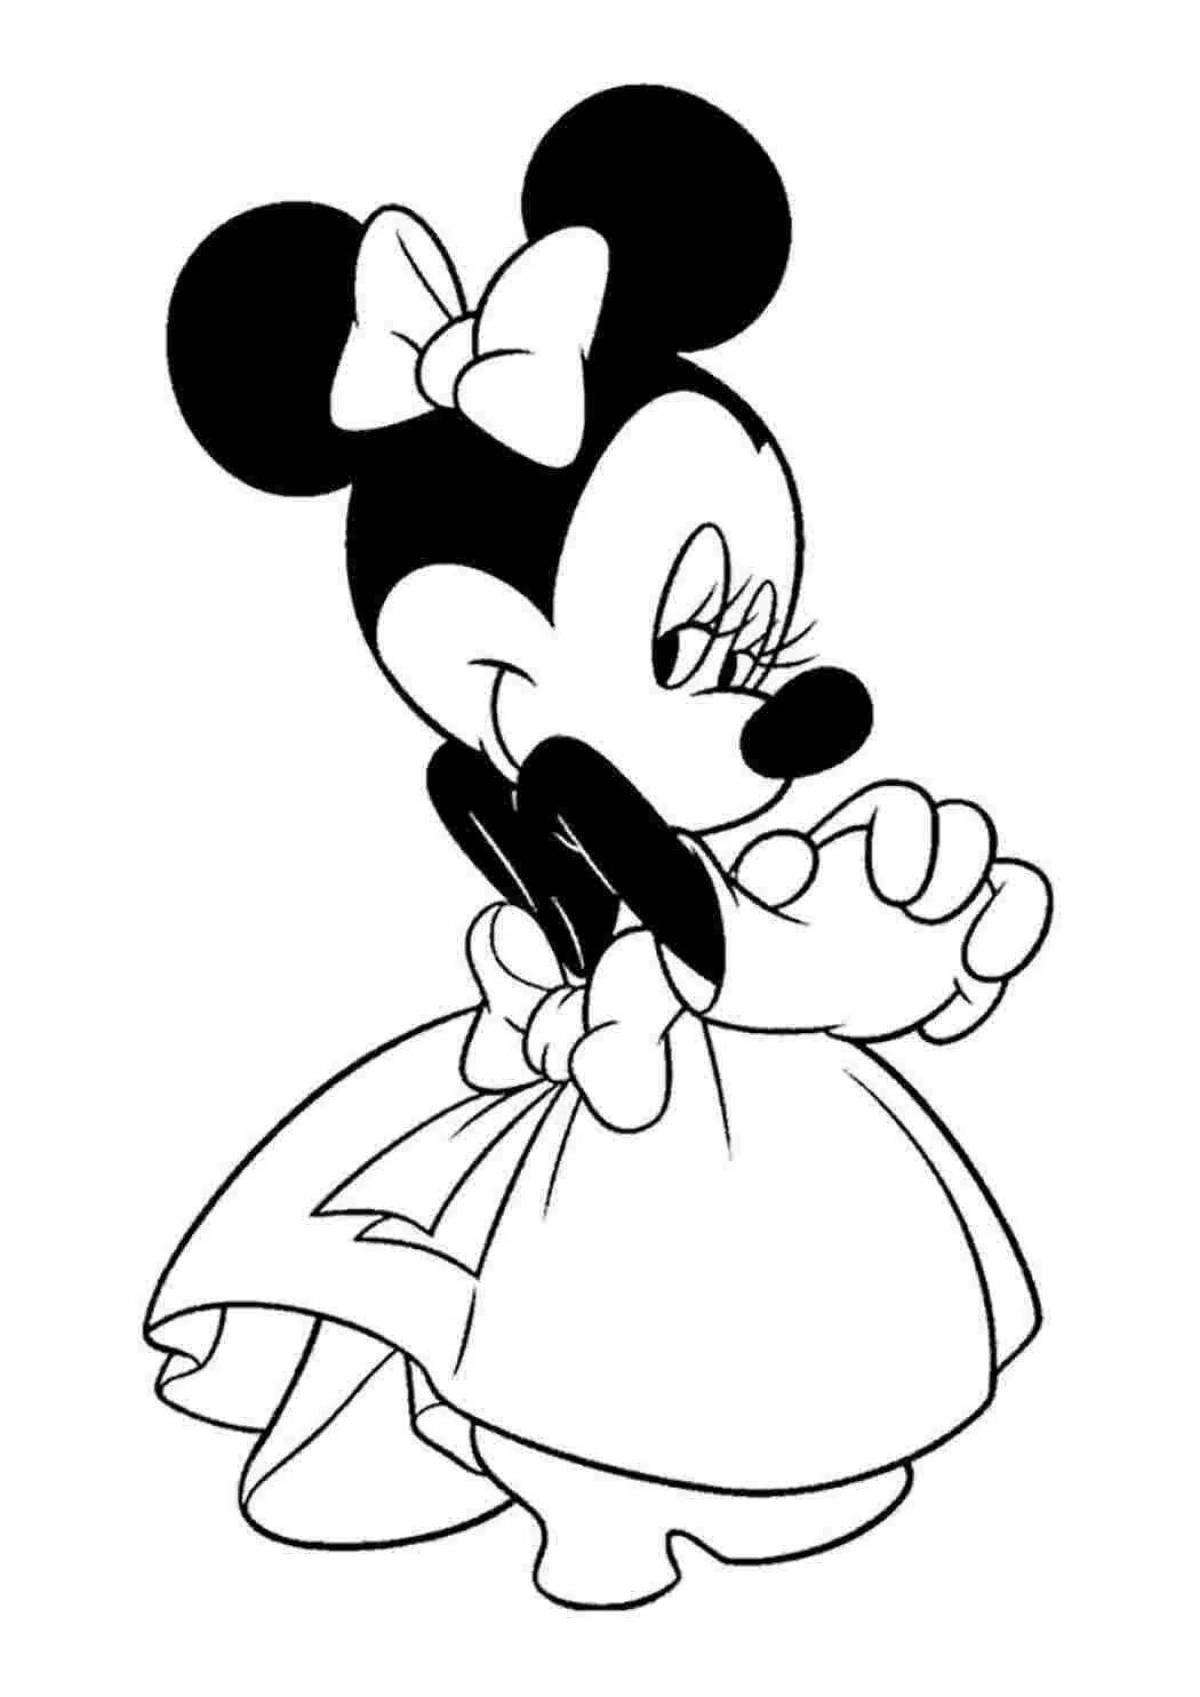 Minnie mouse amazing coloring book